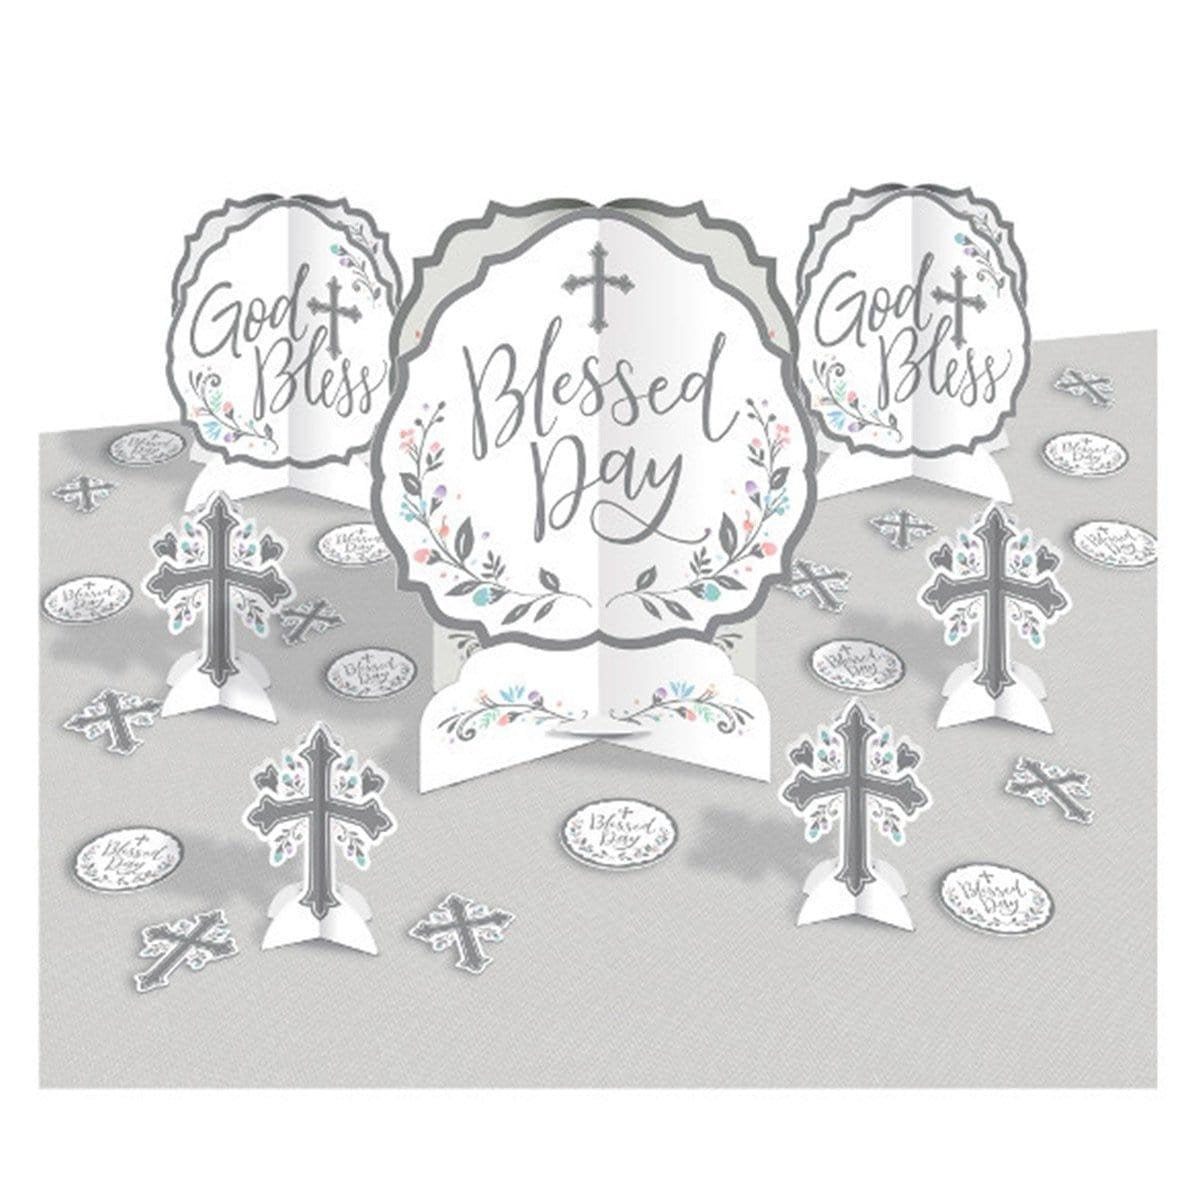 Buy Religious Holy Day - Table Decorating Kit sold at Party Expert